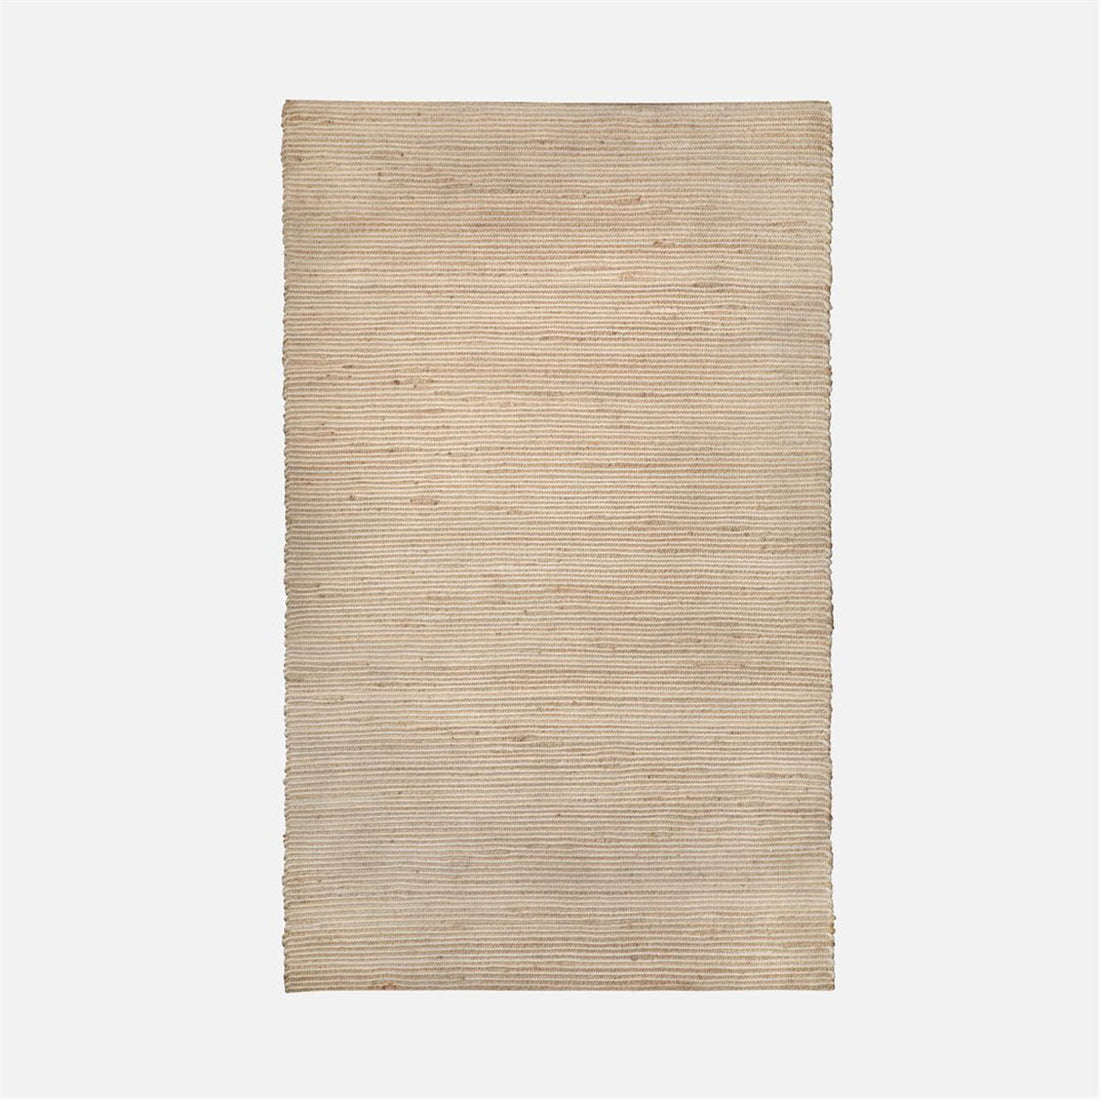 Made Goods Marley Woven Performance Rug